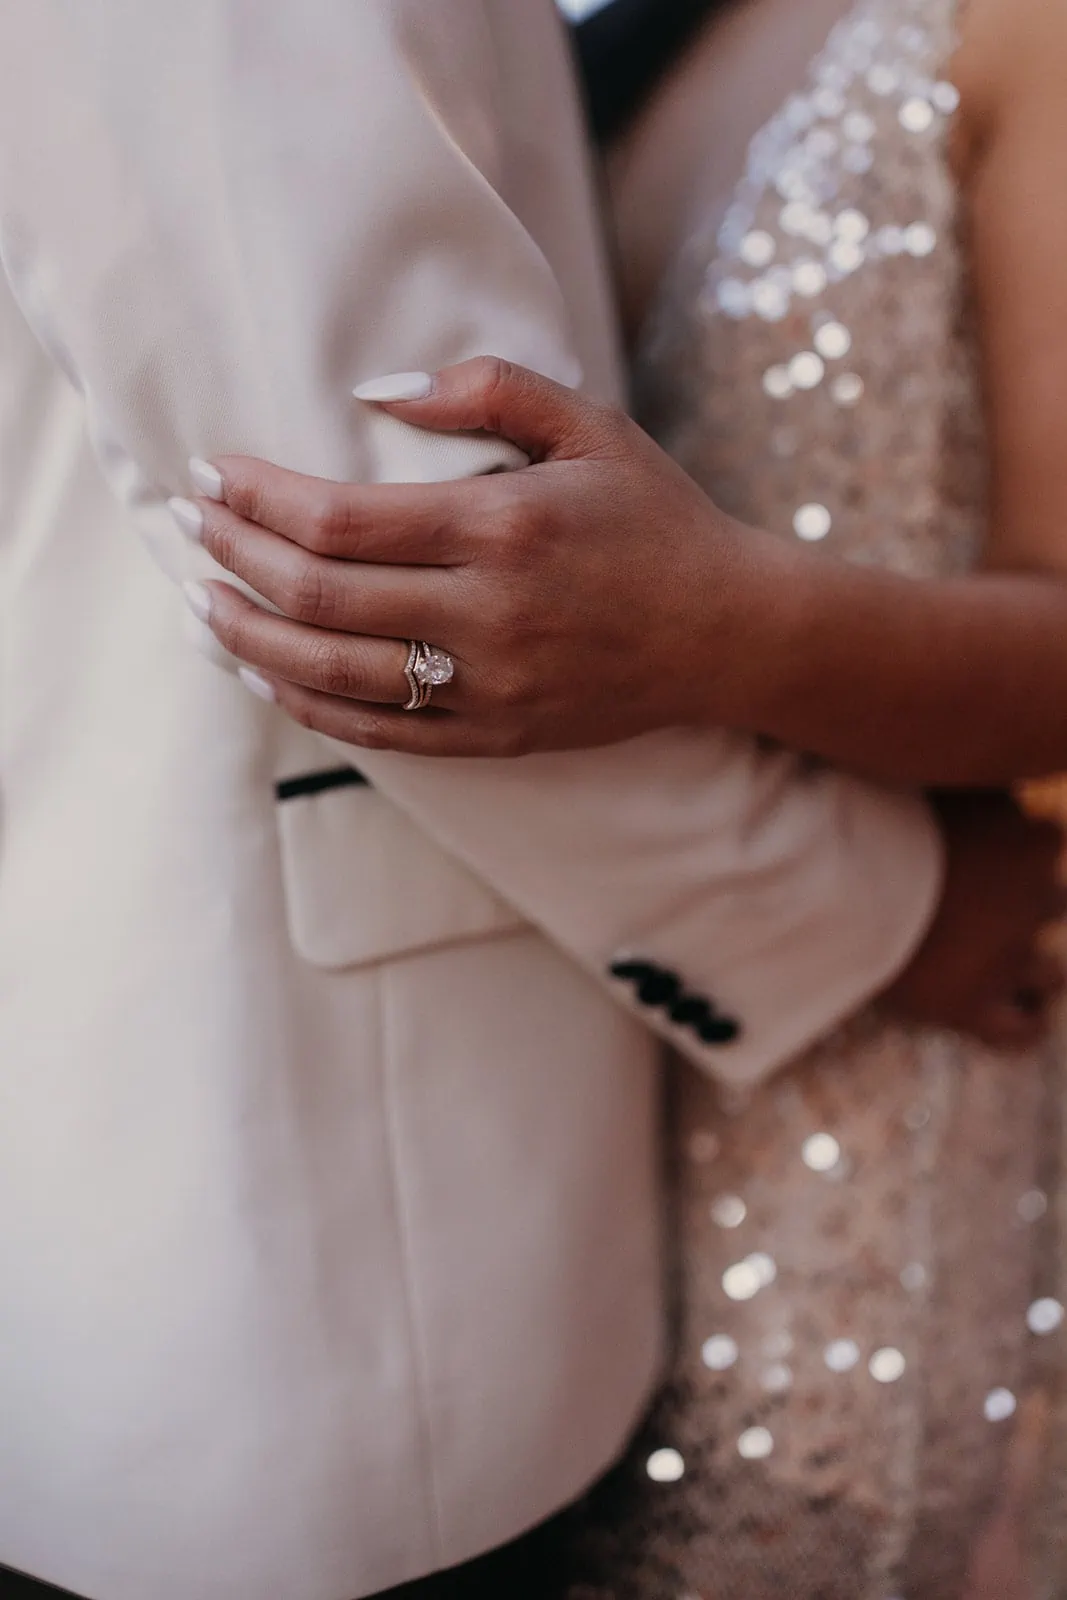 a close up detail photograph of an engagement ring while a couple holds each other closely